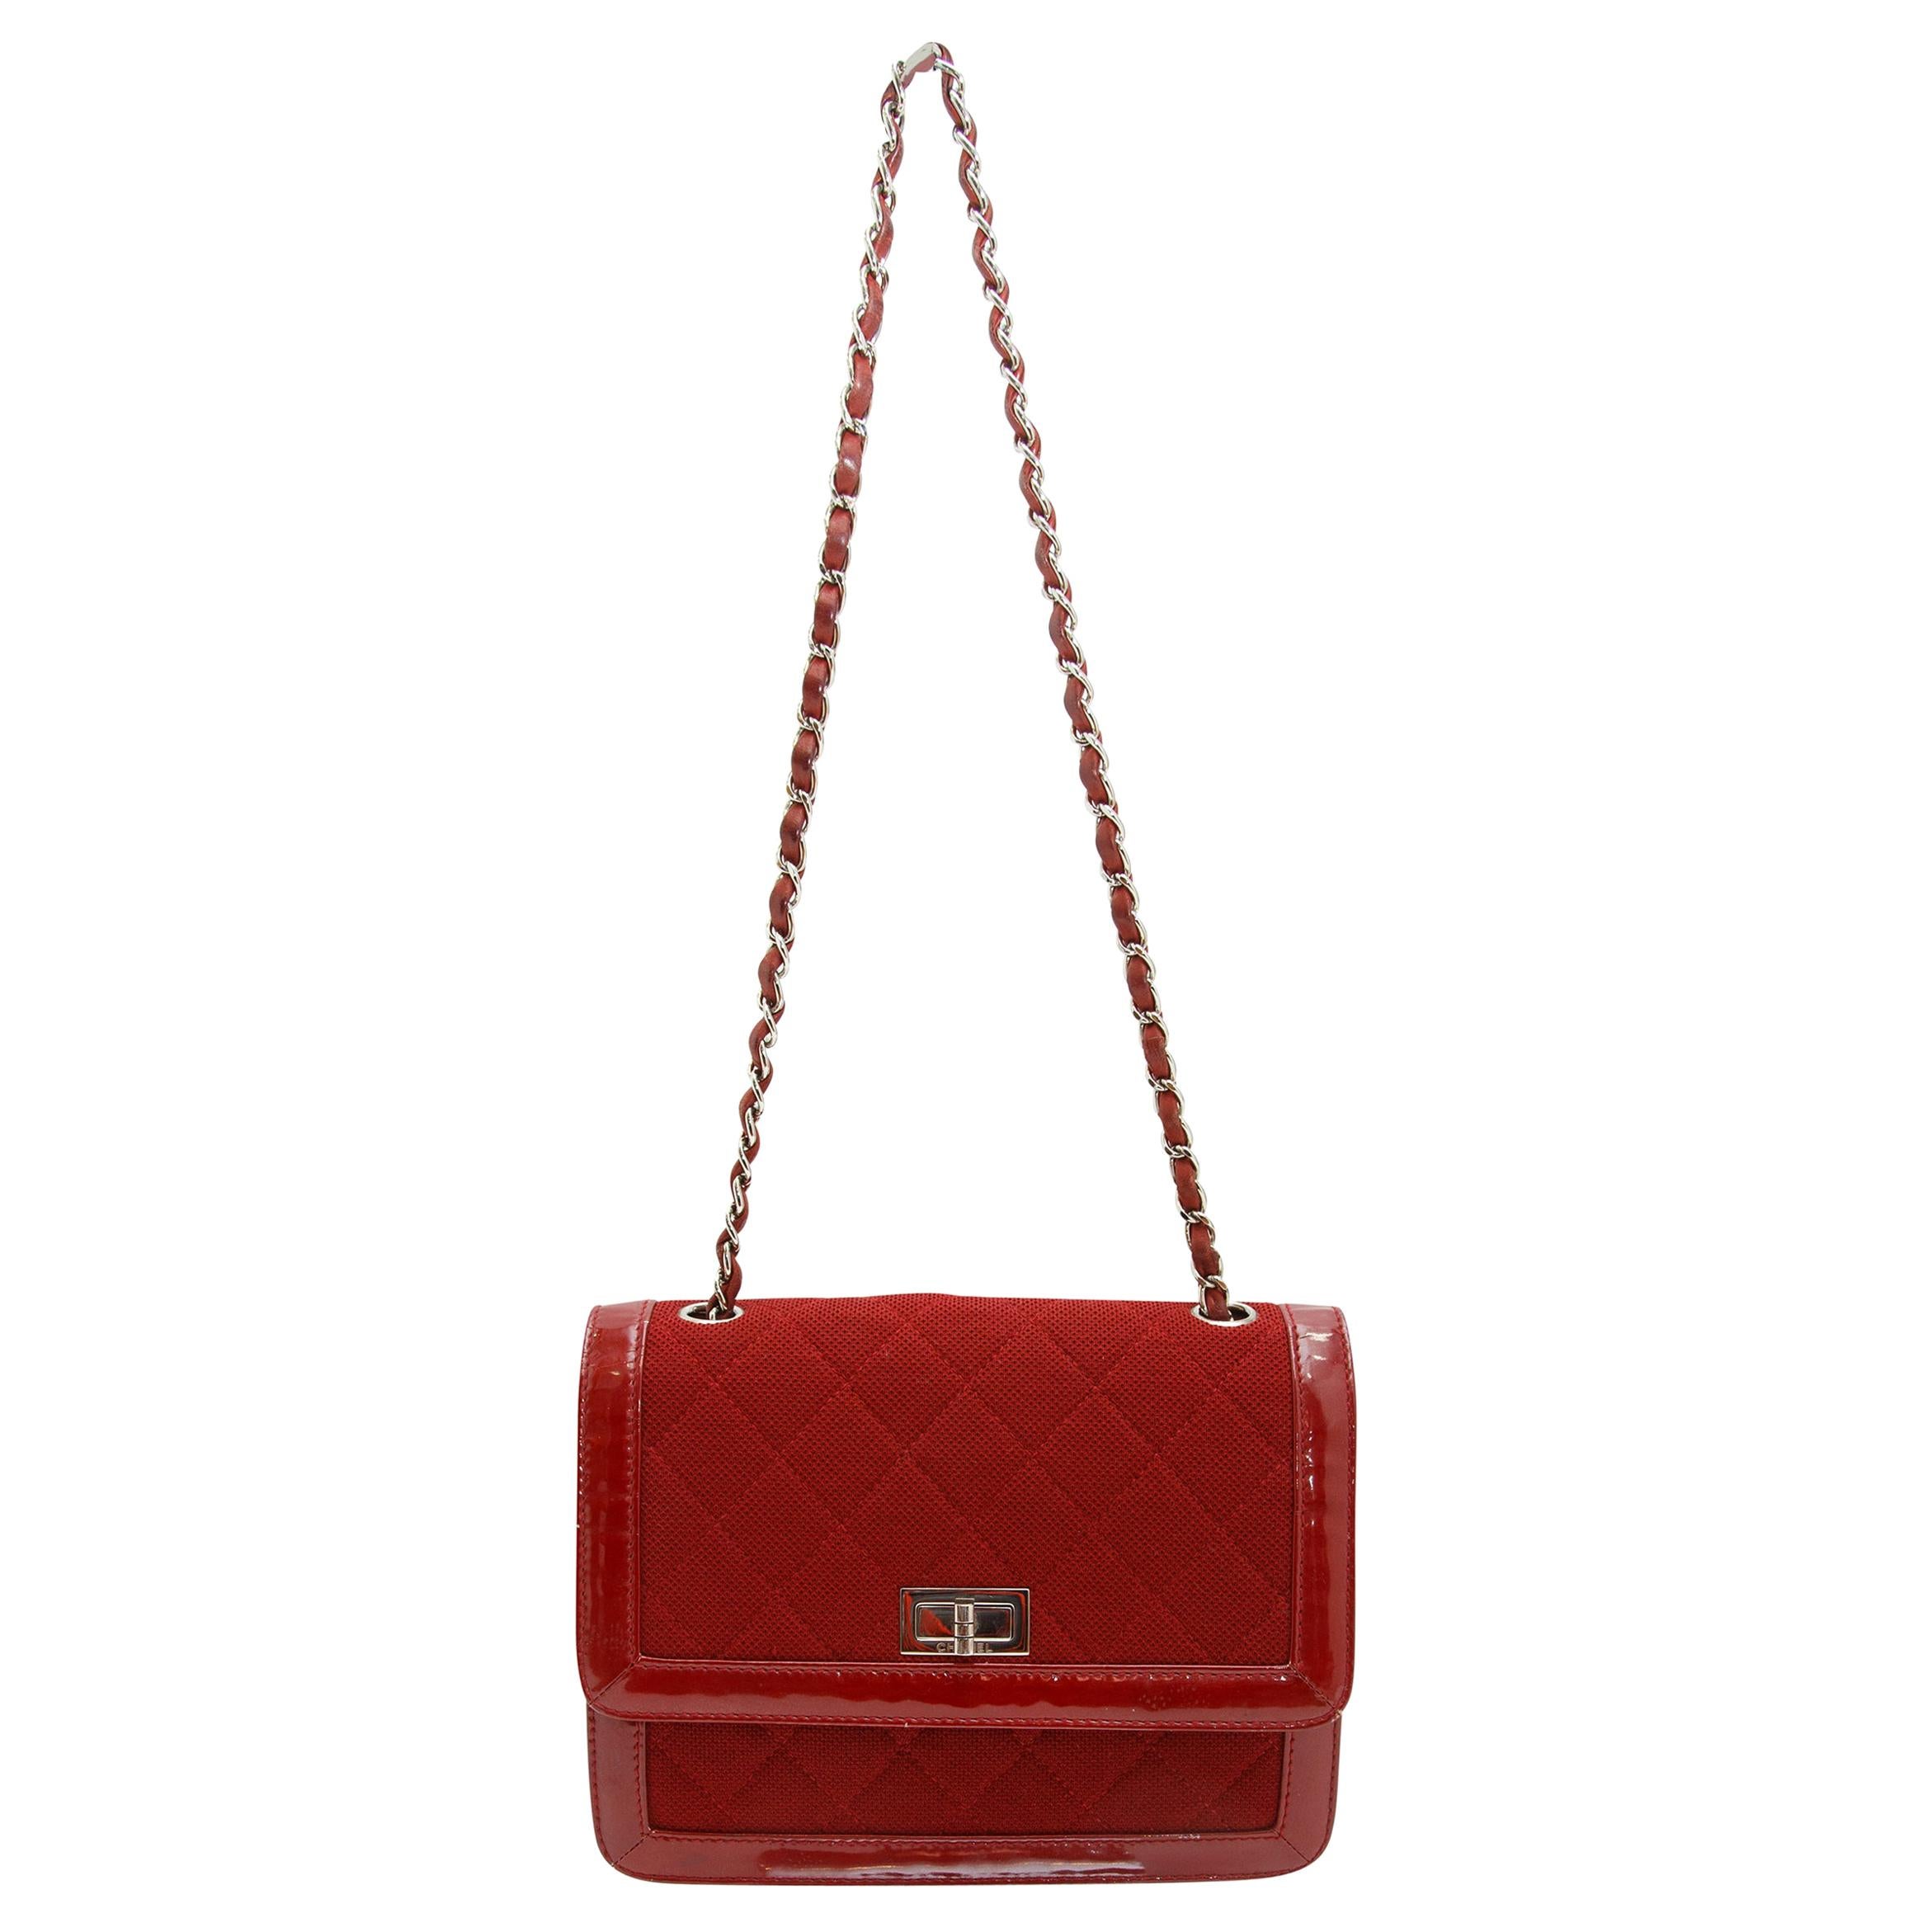 Chanel Red Reissue Cloth & Patent Bag